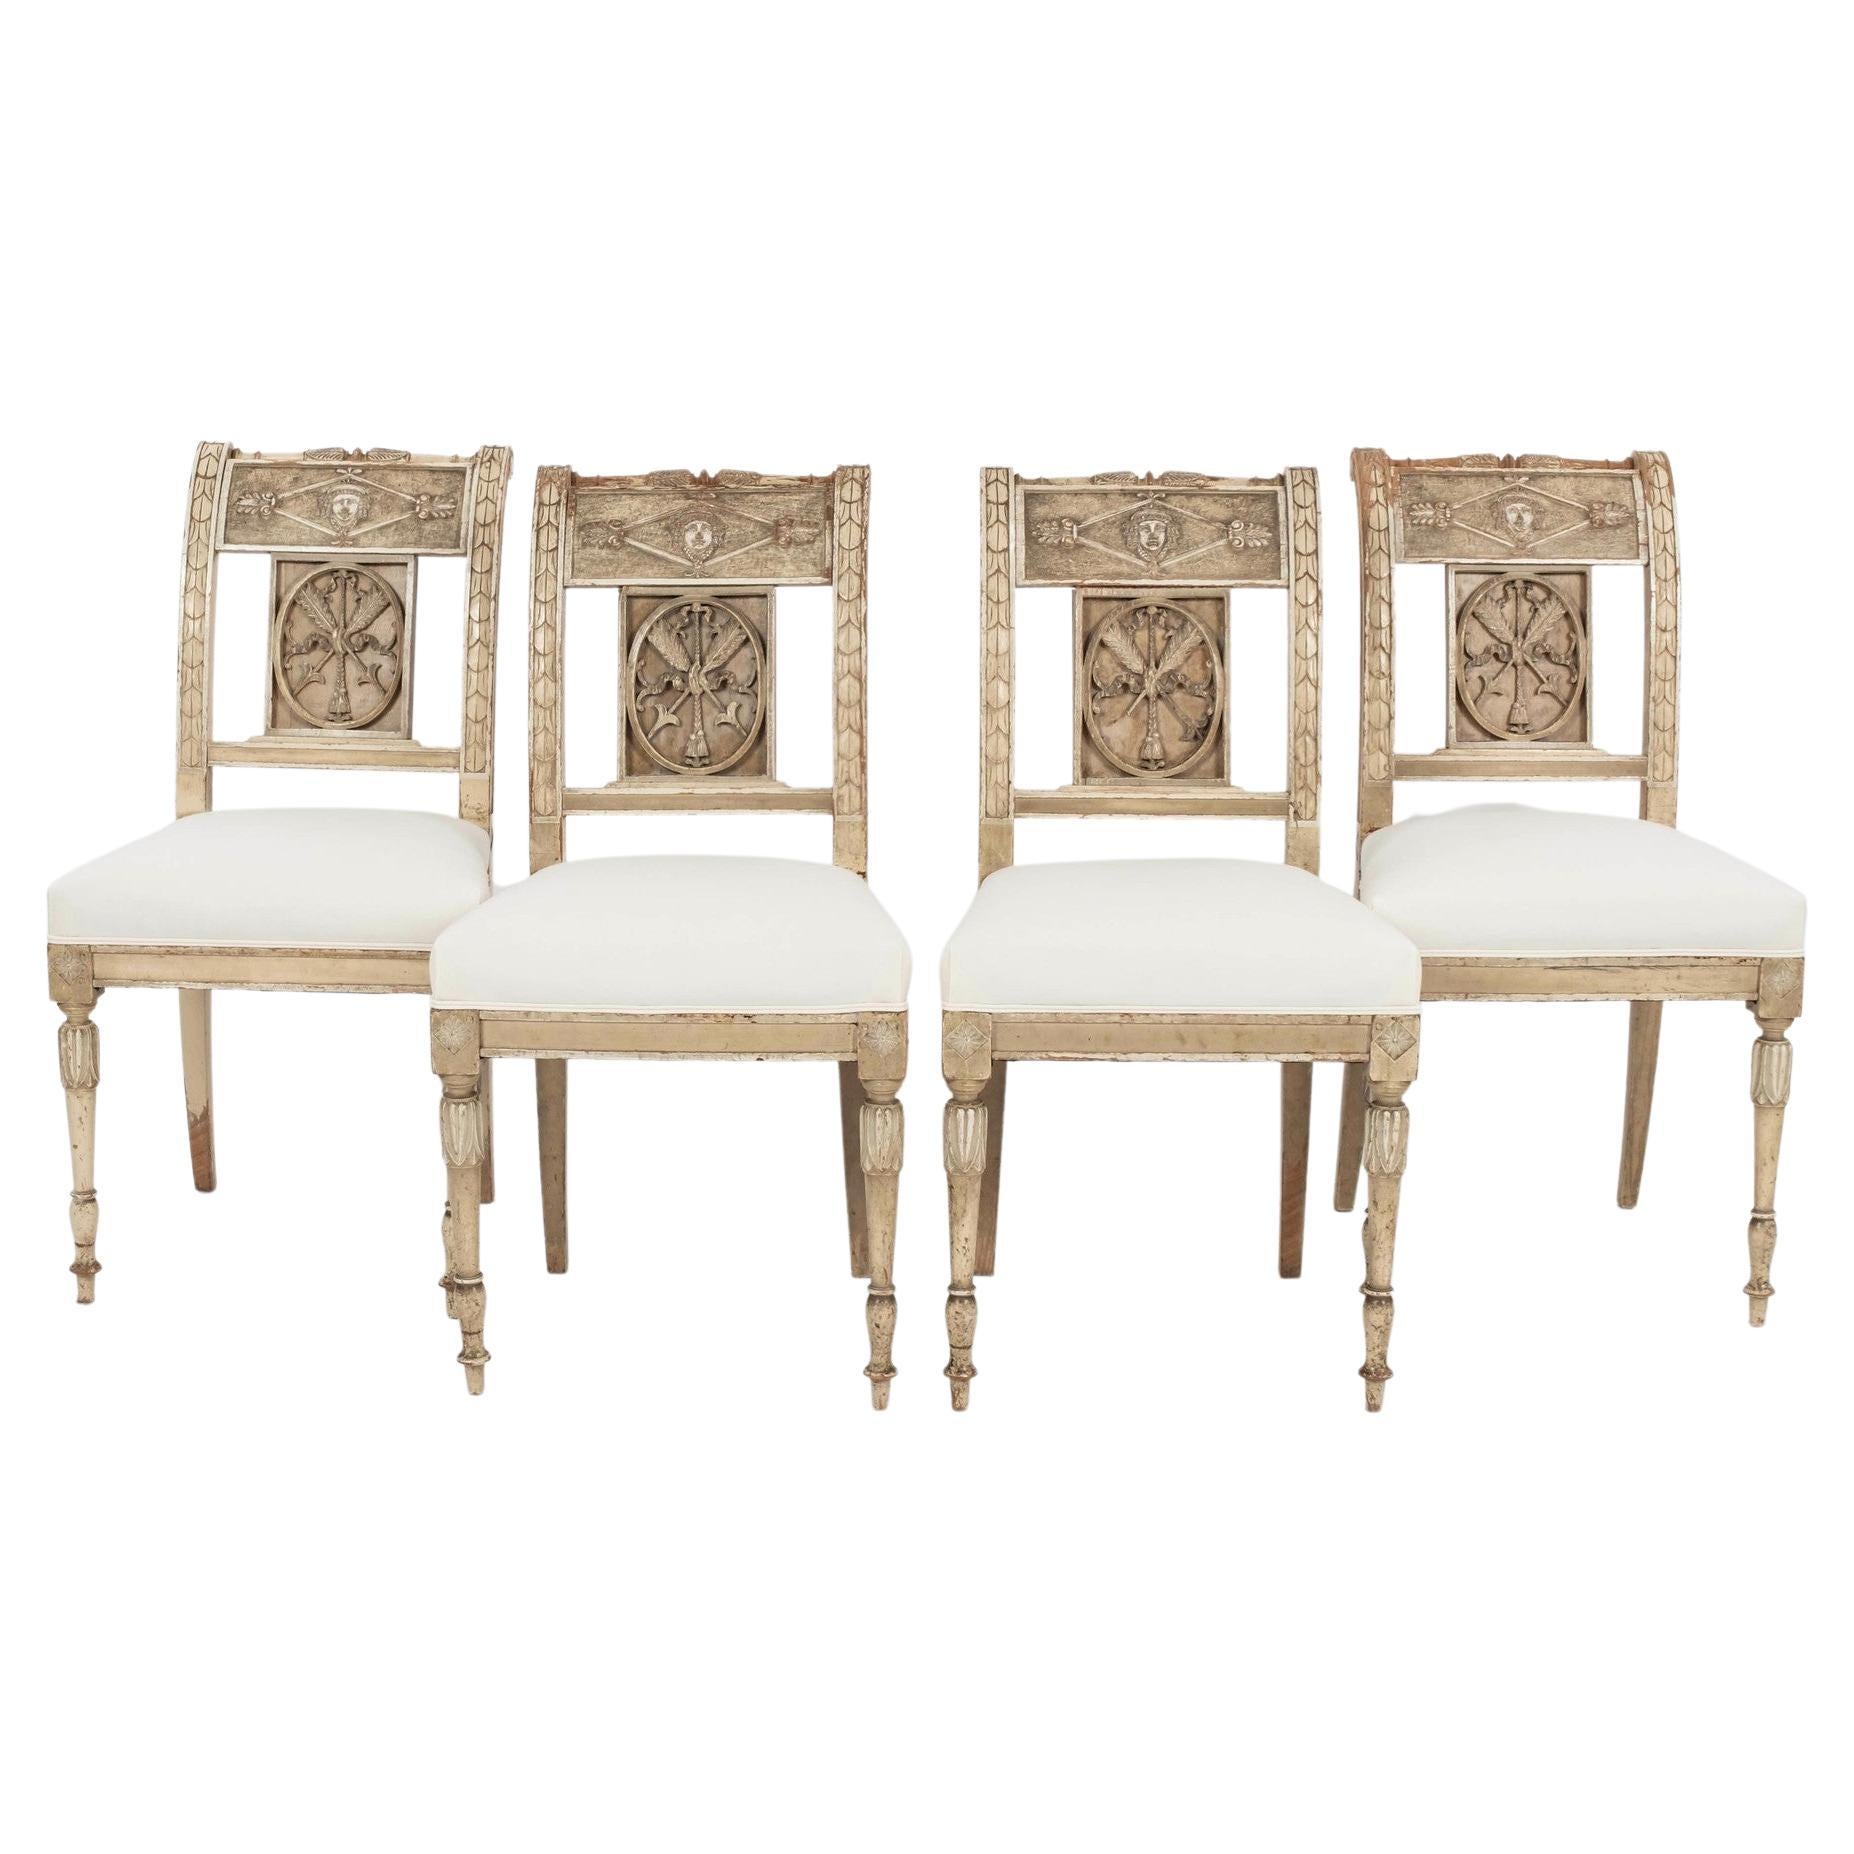 Set of Four 18th Century Neoclassical Gustavian Chairs For Sale